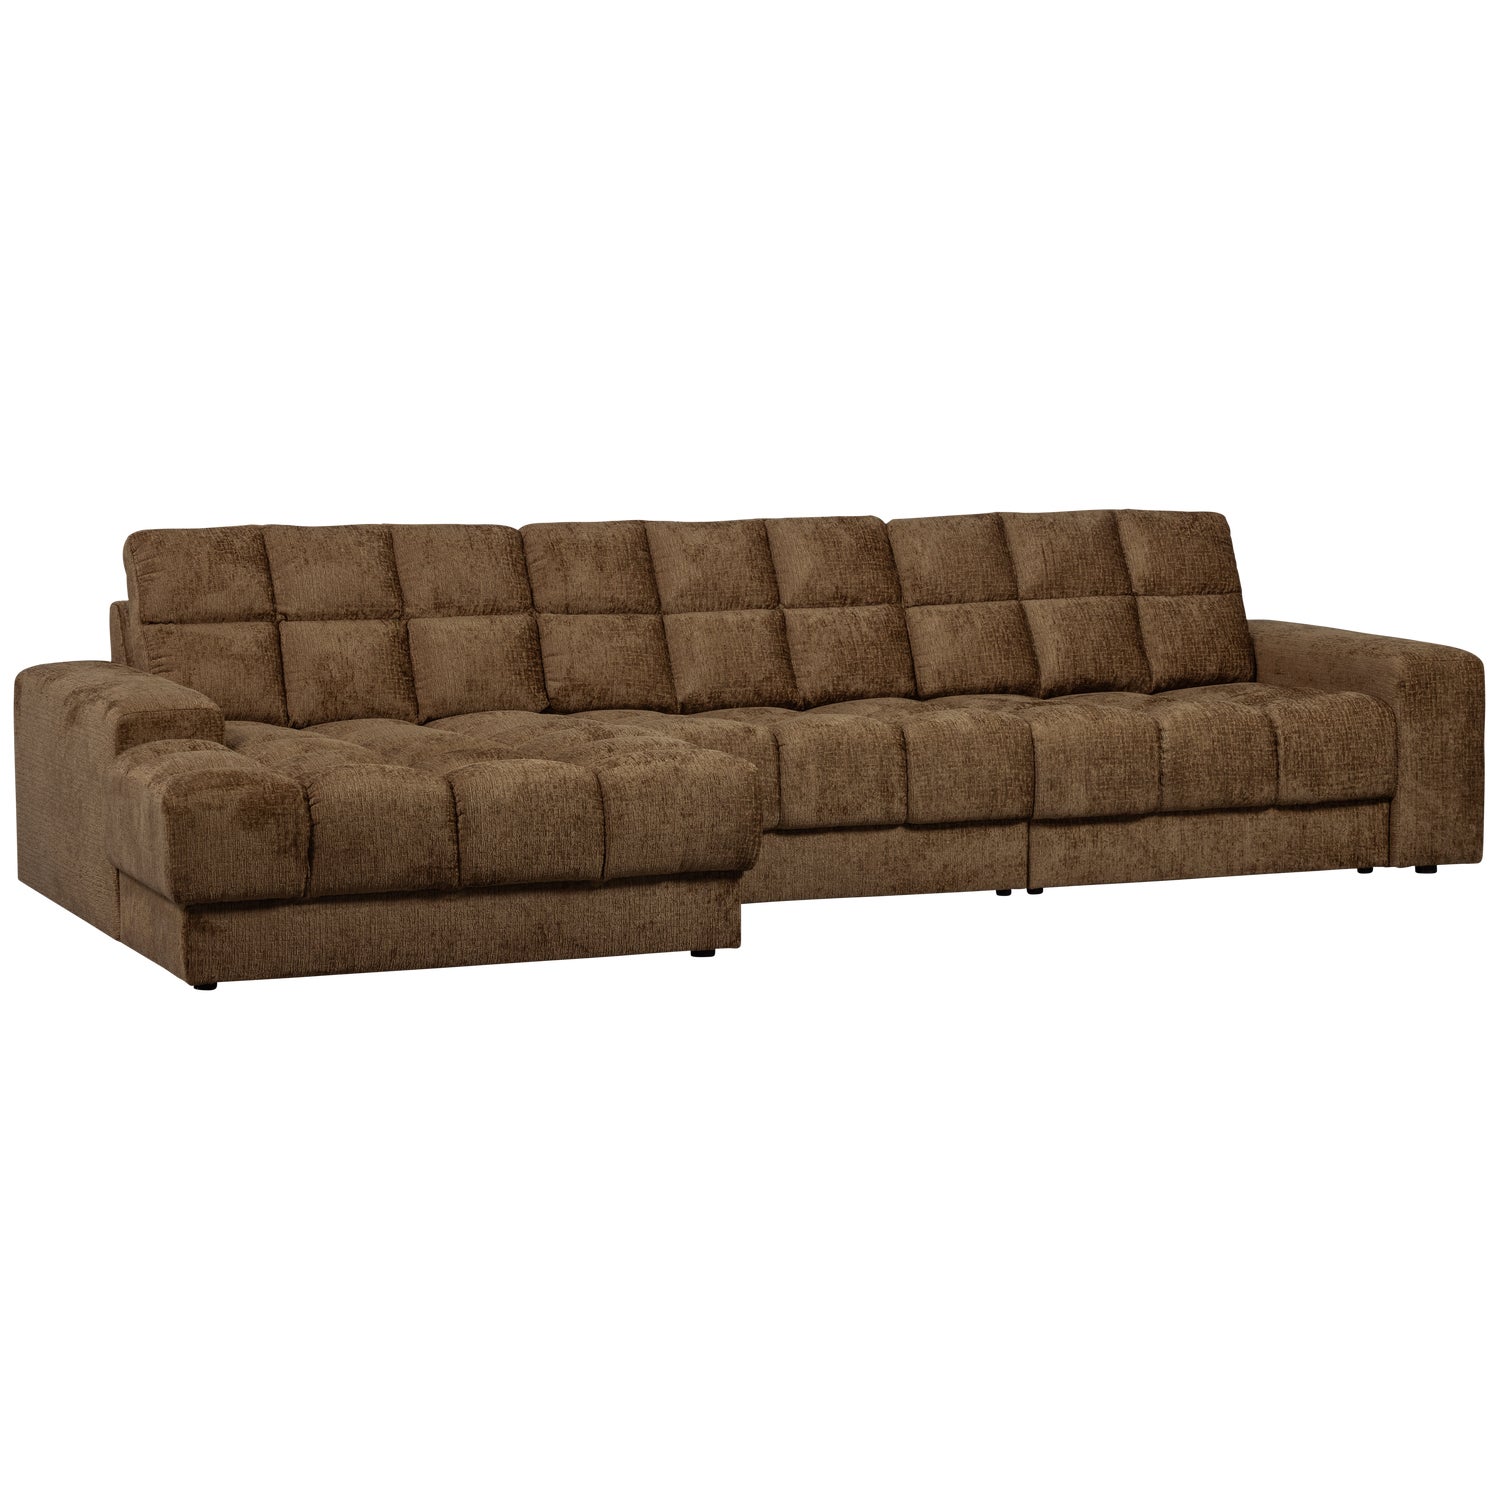 379012-BR-03_VS_WE_Second_date_chaise_longue_links_structure_velvet_brass.png?auto=webp&format=png&width=1500&height=1500